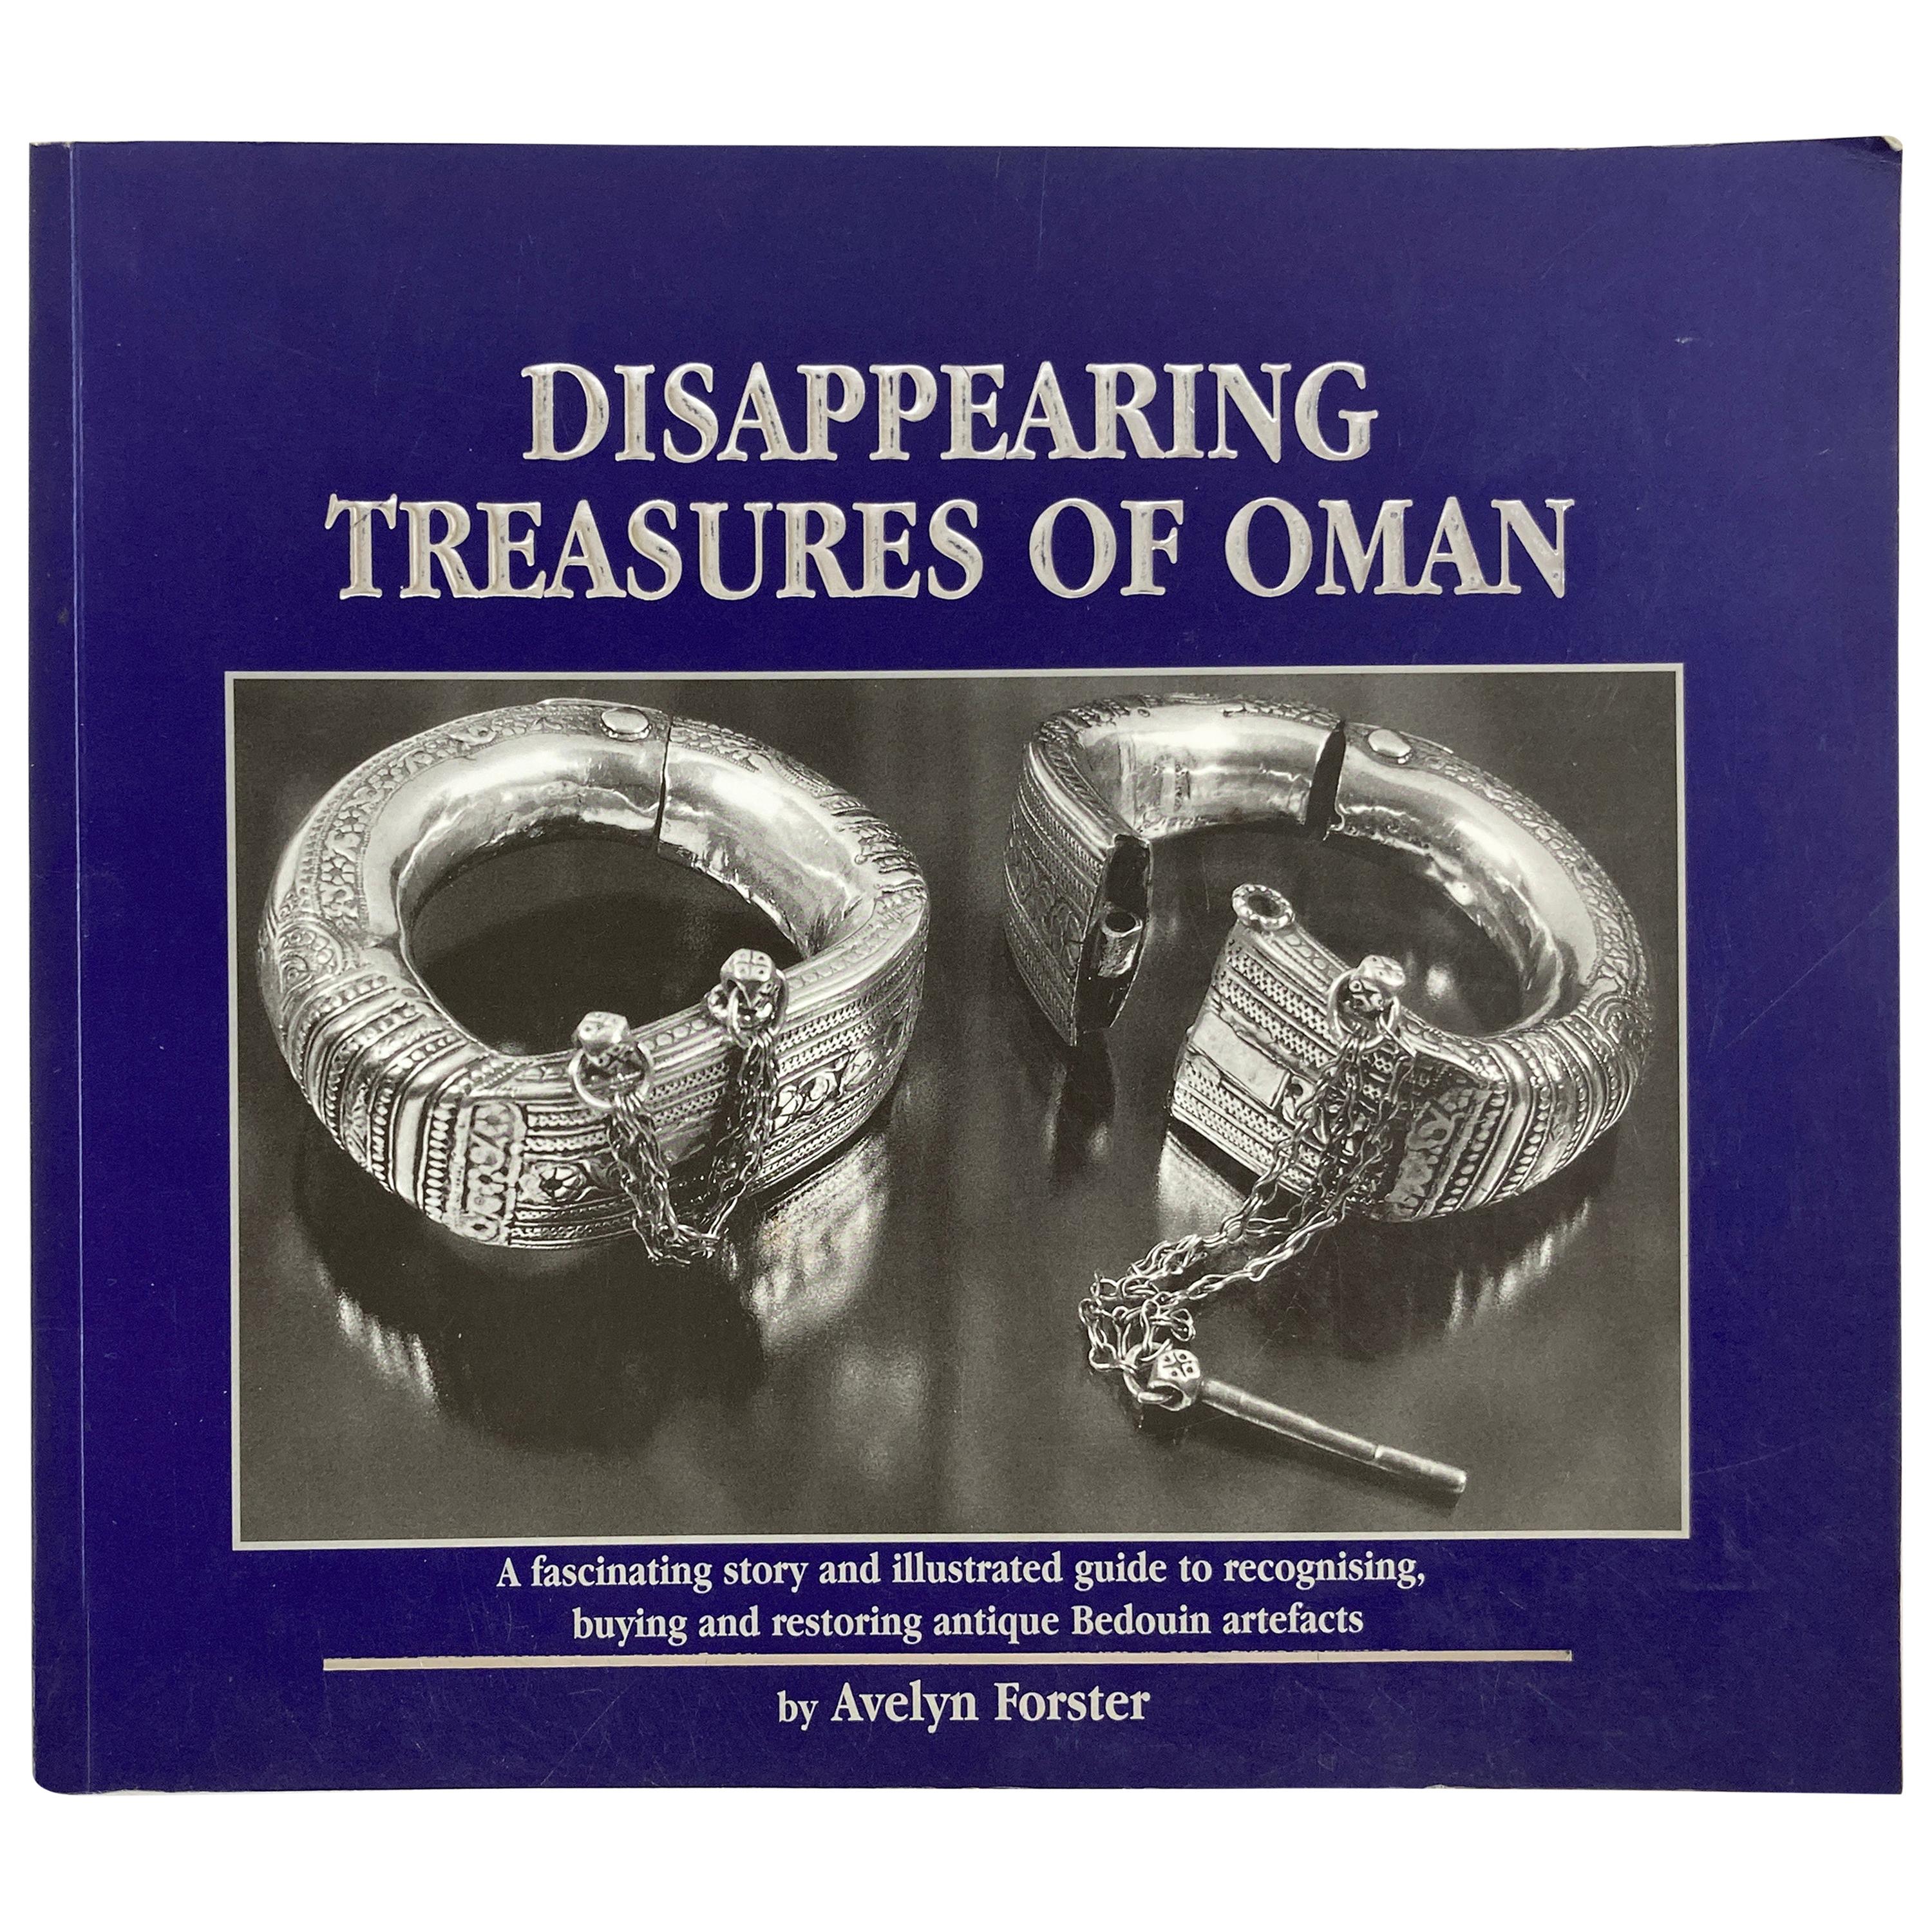 Disappearing Treasures of Oman, Buch von Avelyn Forster im Angebot